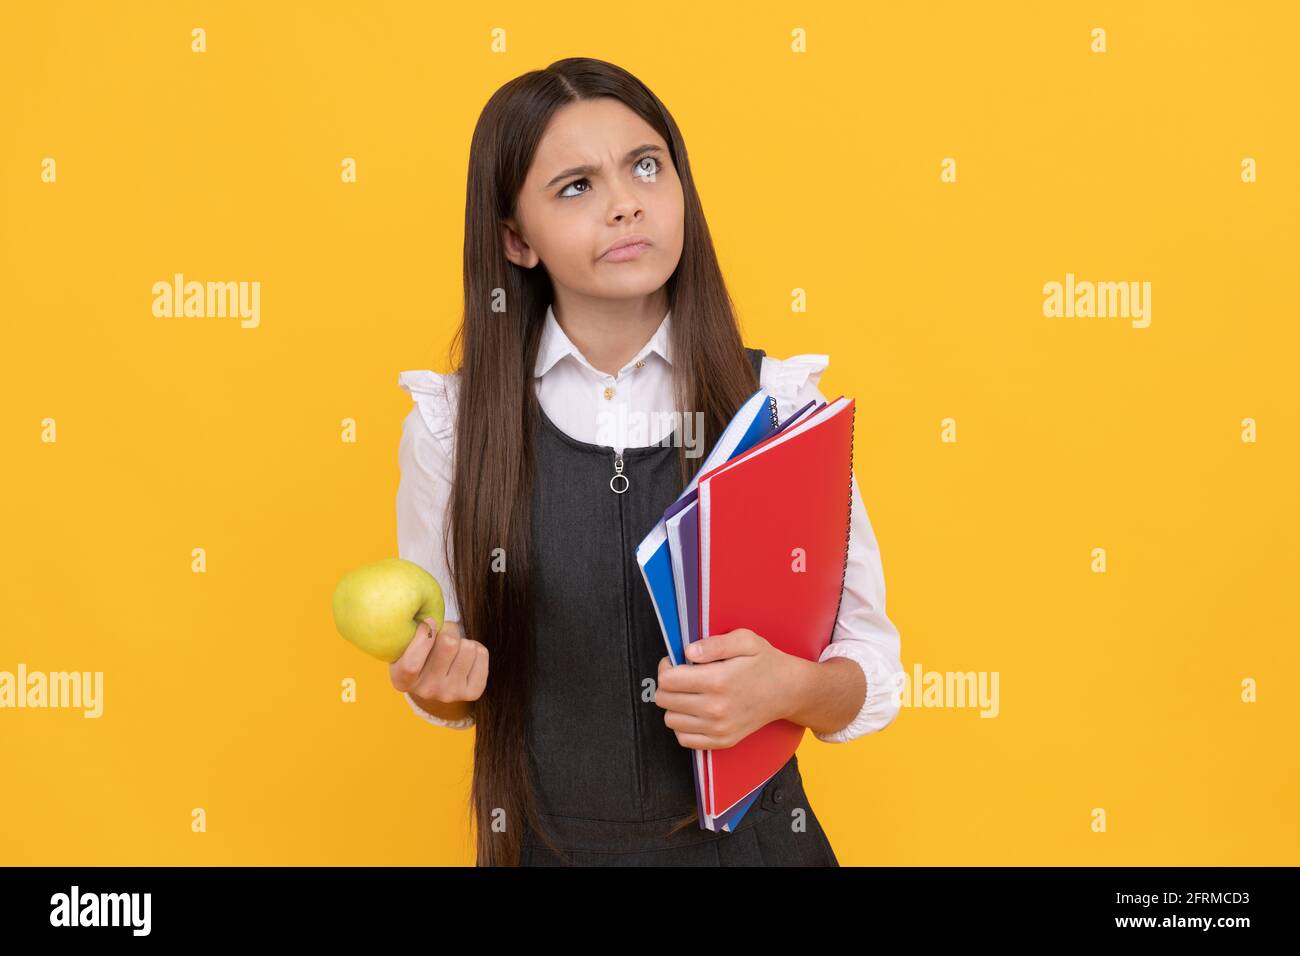 Serious school-aged girl child think holding apple and books yellow background, thinking Stock Photo